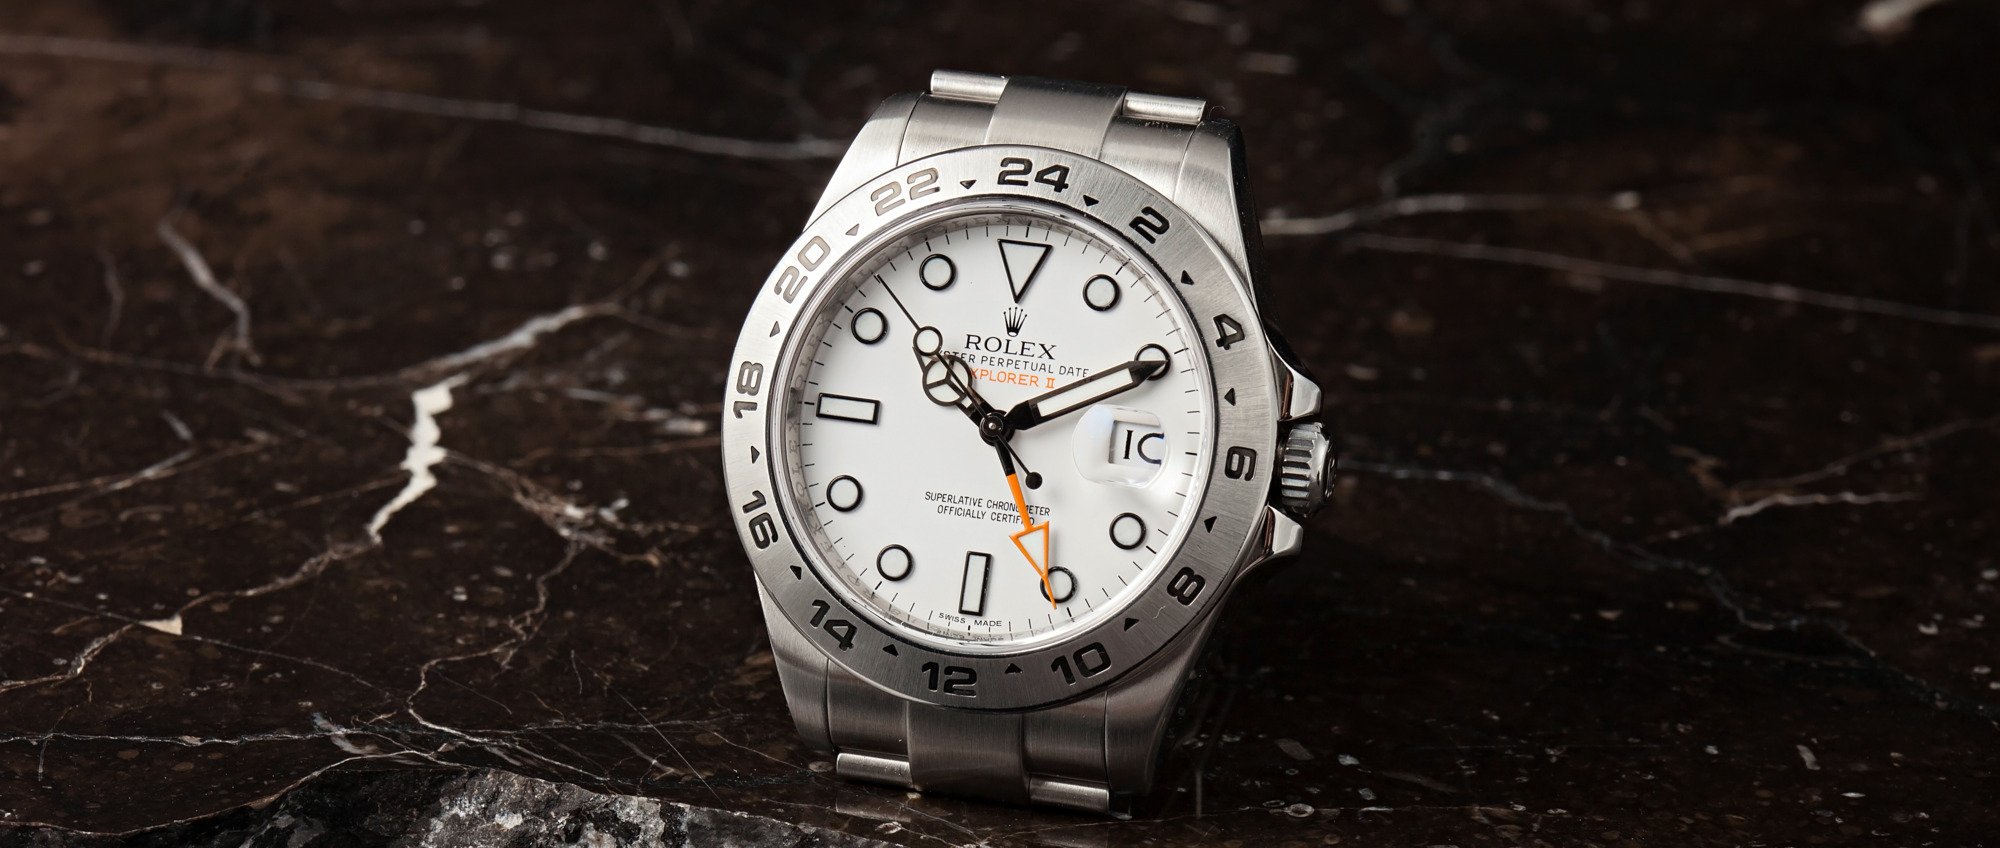 Rolex White Face Watches Buying Guide